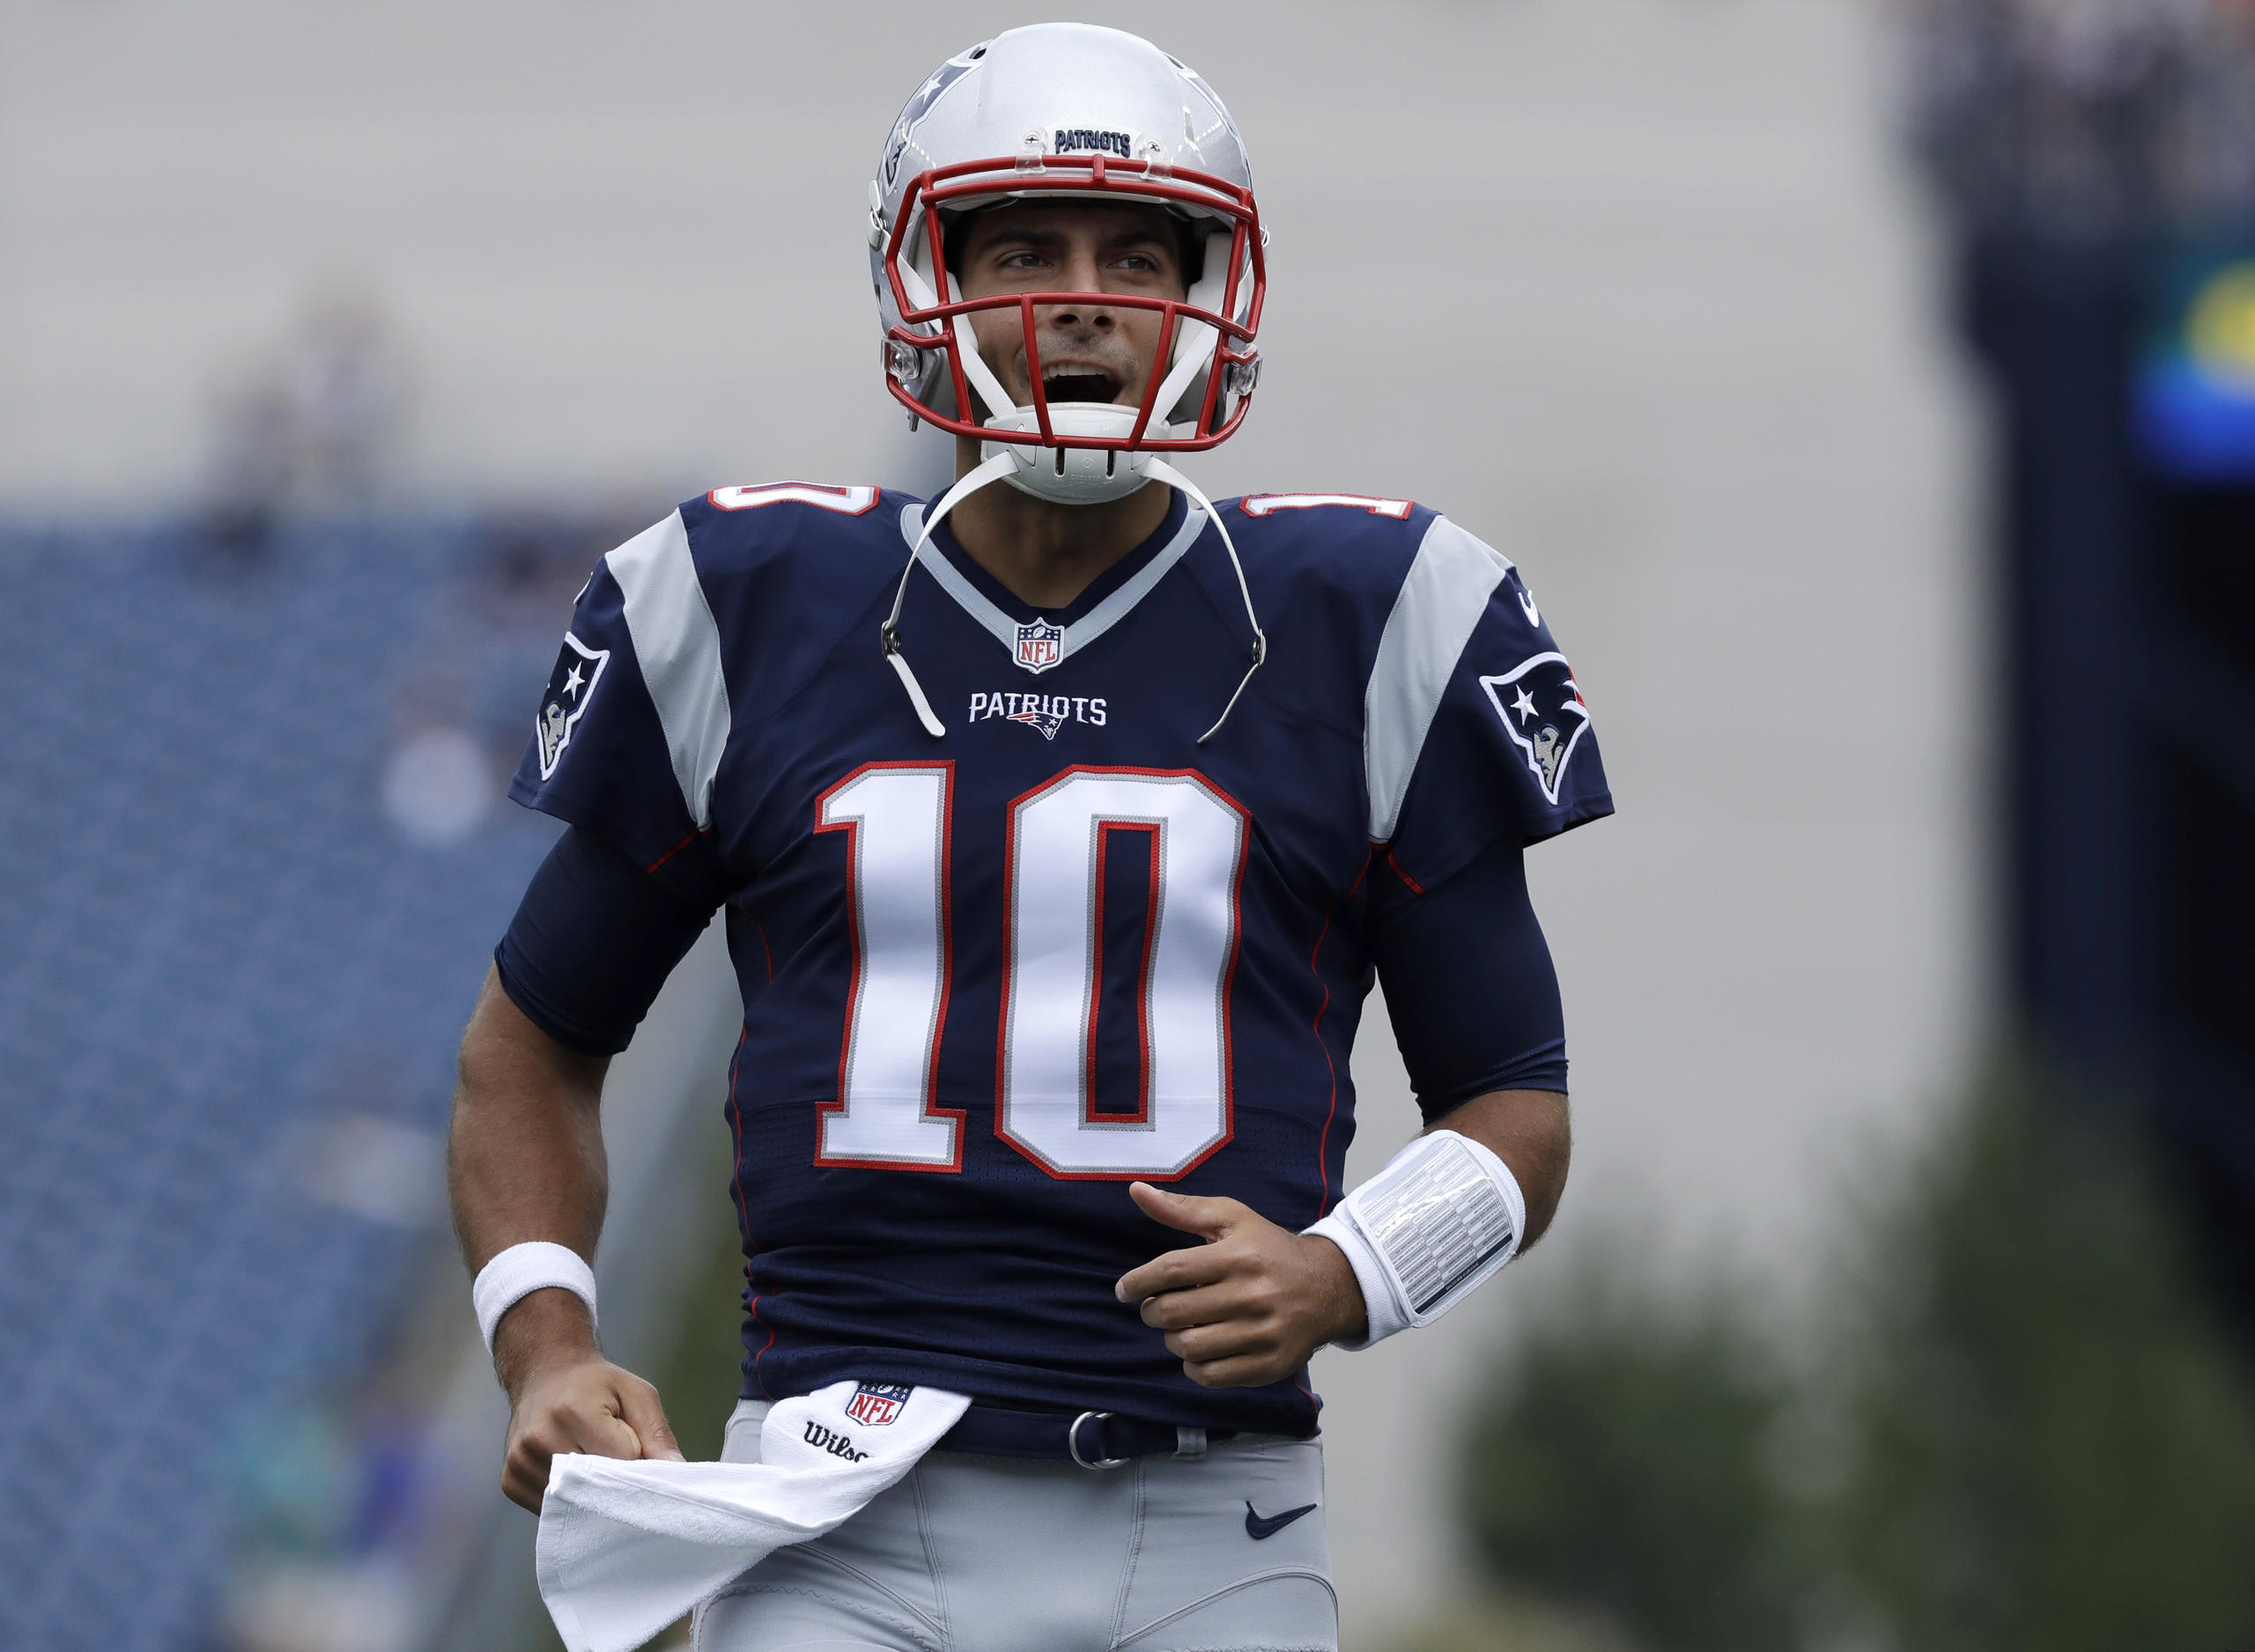 New England Patriots quarterback Jimmy Garoppolo takes the field to warm up before an NFL football game against the Miami Dolphins Sunday, Sept. 18, 2016, in Foxborough, Mass. (AP Photo/Charles Krupa)